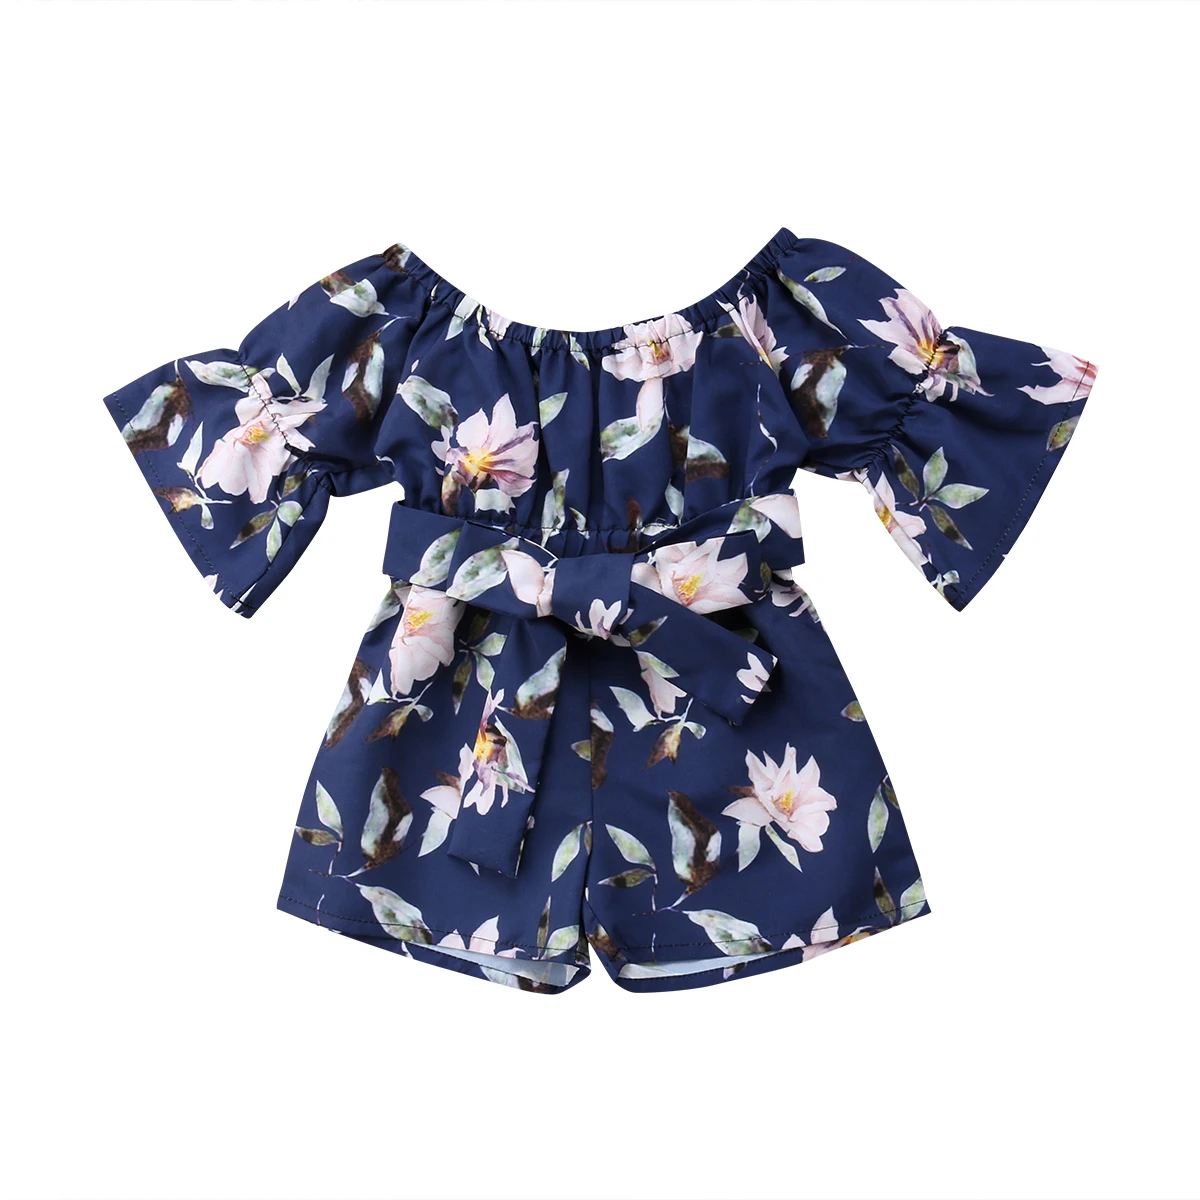 

Cute Toddler Baby Girl Clothing Romper Floral Short Sleeve Belt Bow Jumpsuit Sunsuit Summer Clothes Girls 6M-5T